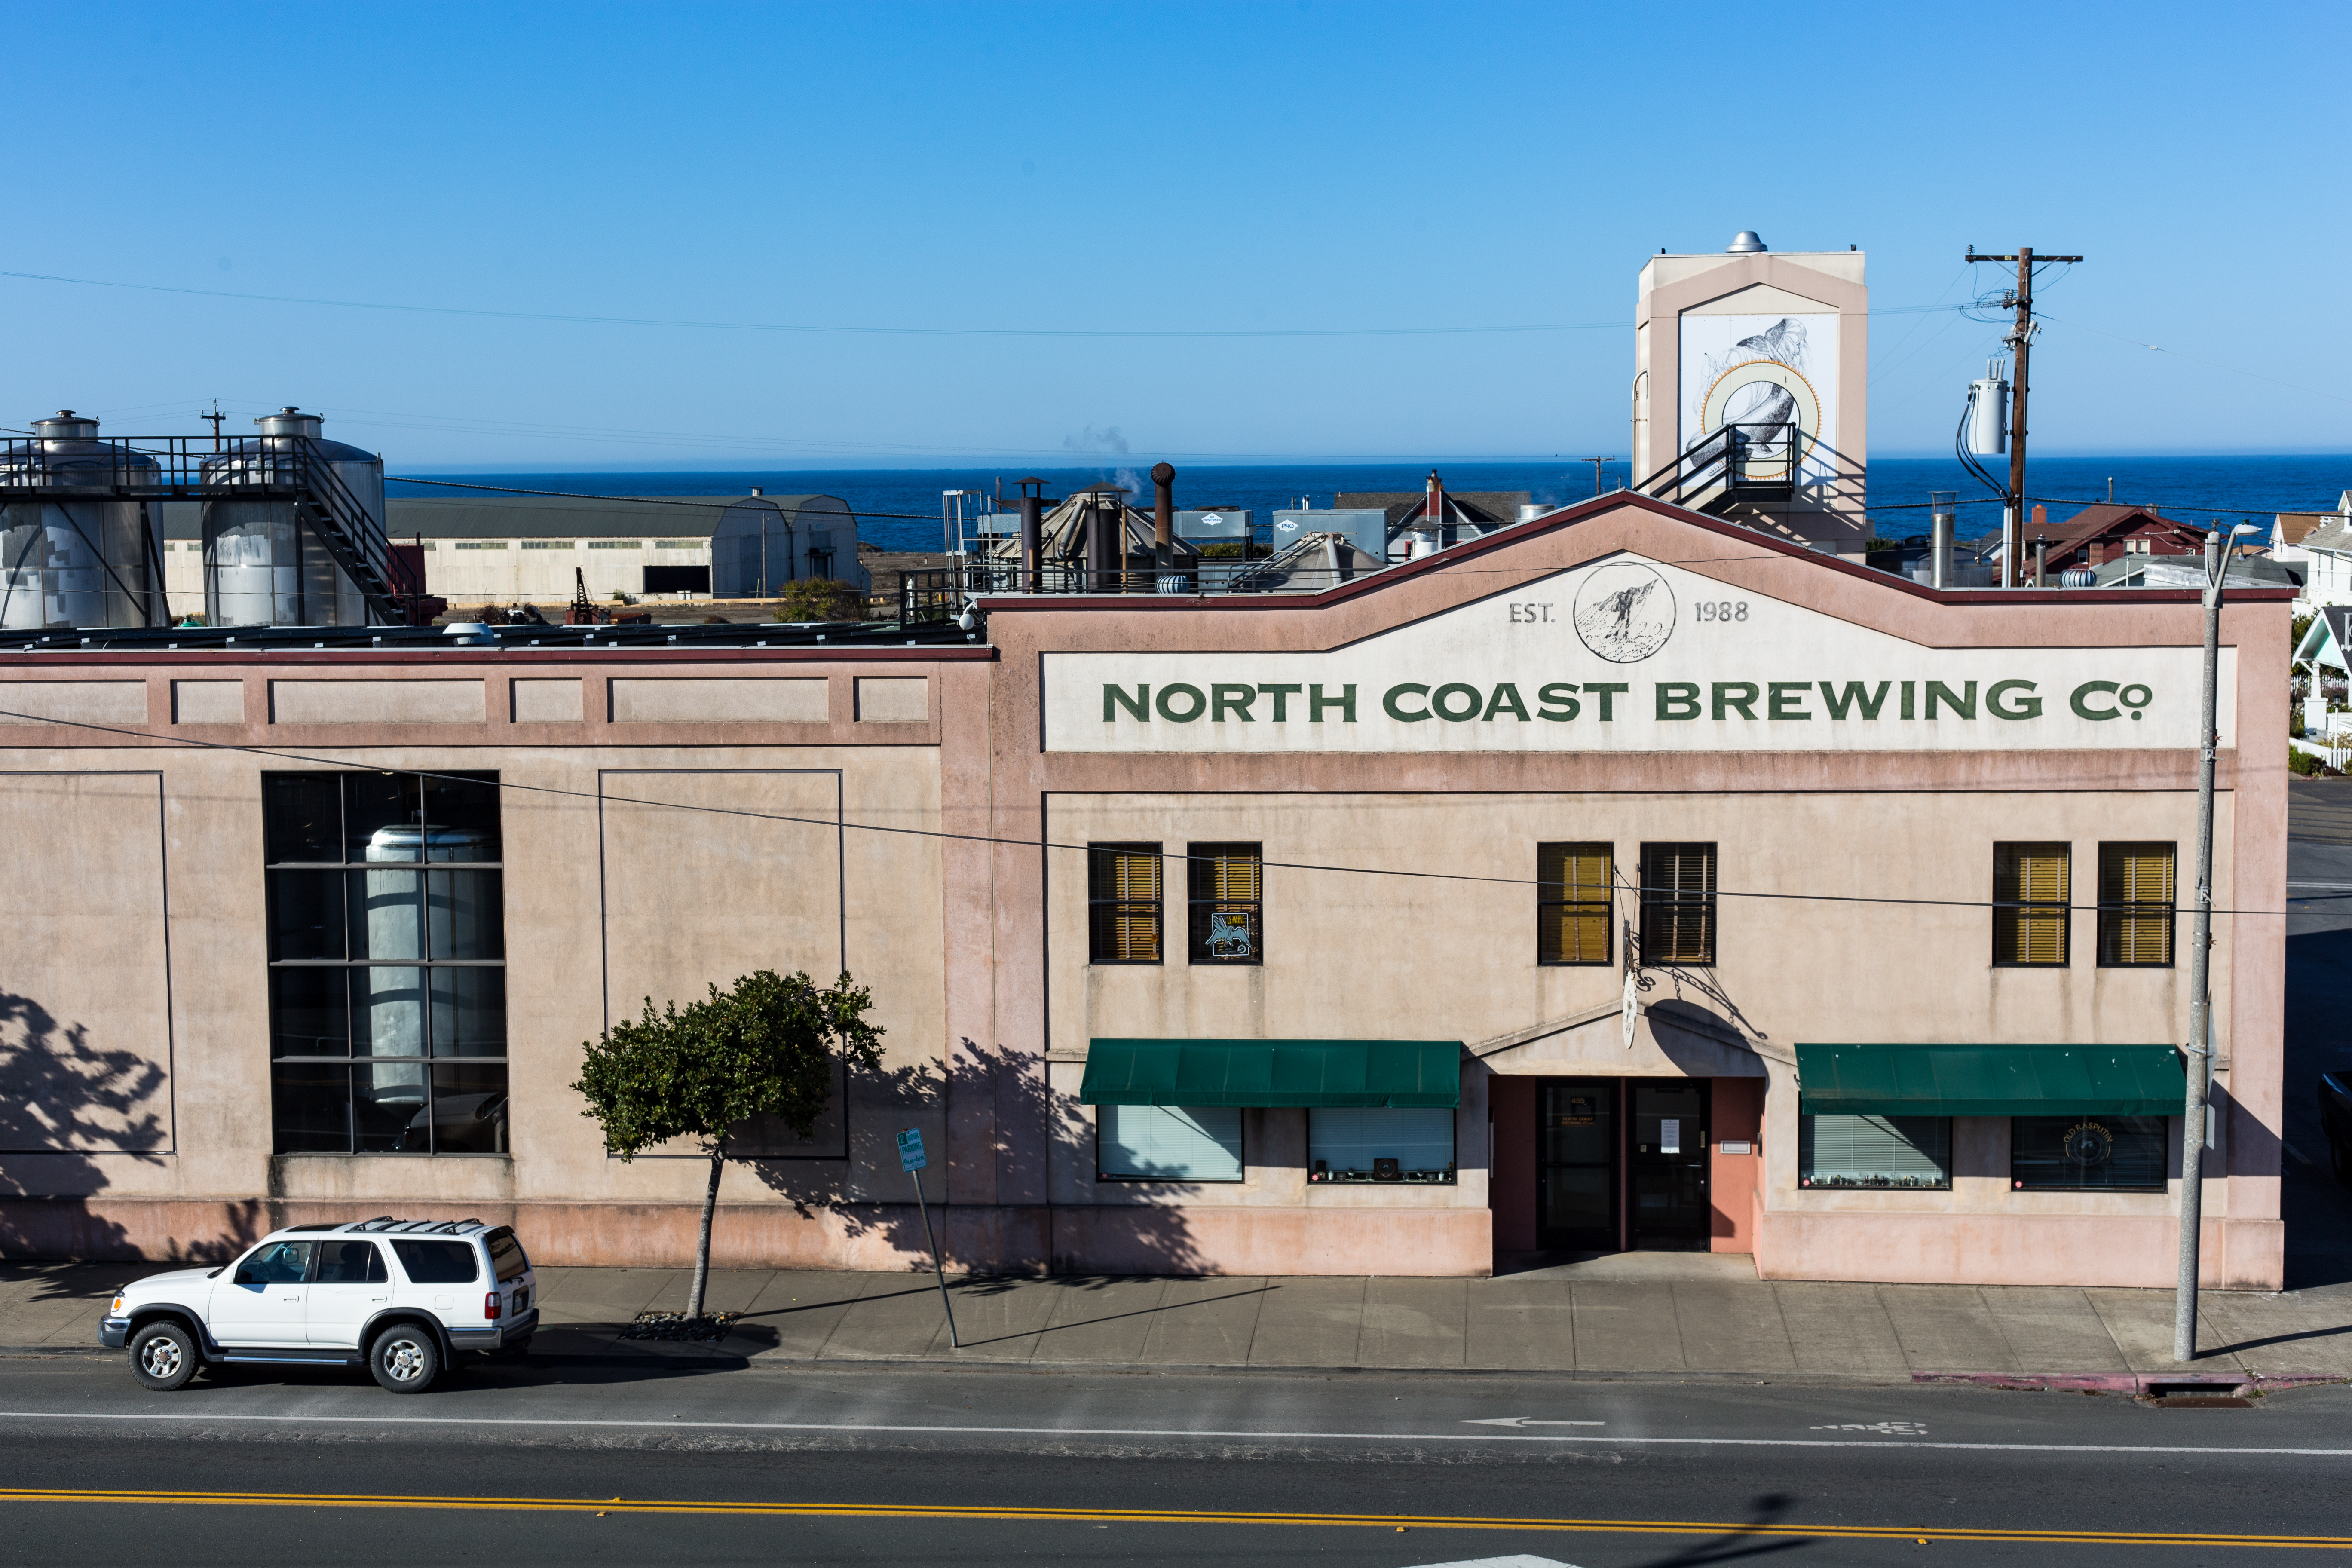 NCBC in the News | It’s Not Just Hops And Malt For Jazz-Loving Craft-Beer Pioneer North Coast Brewing